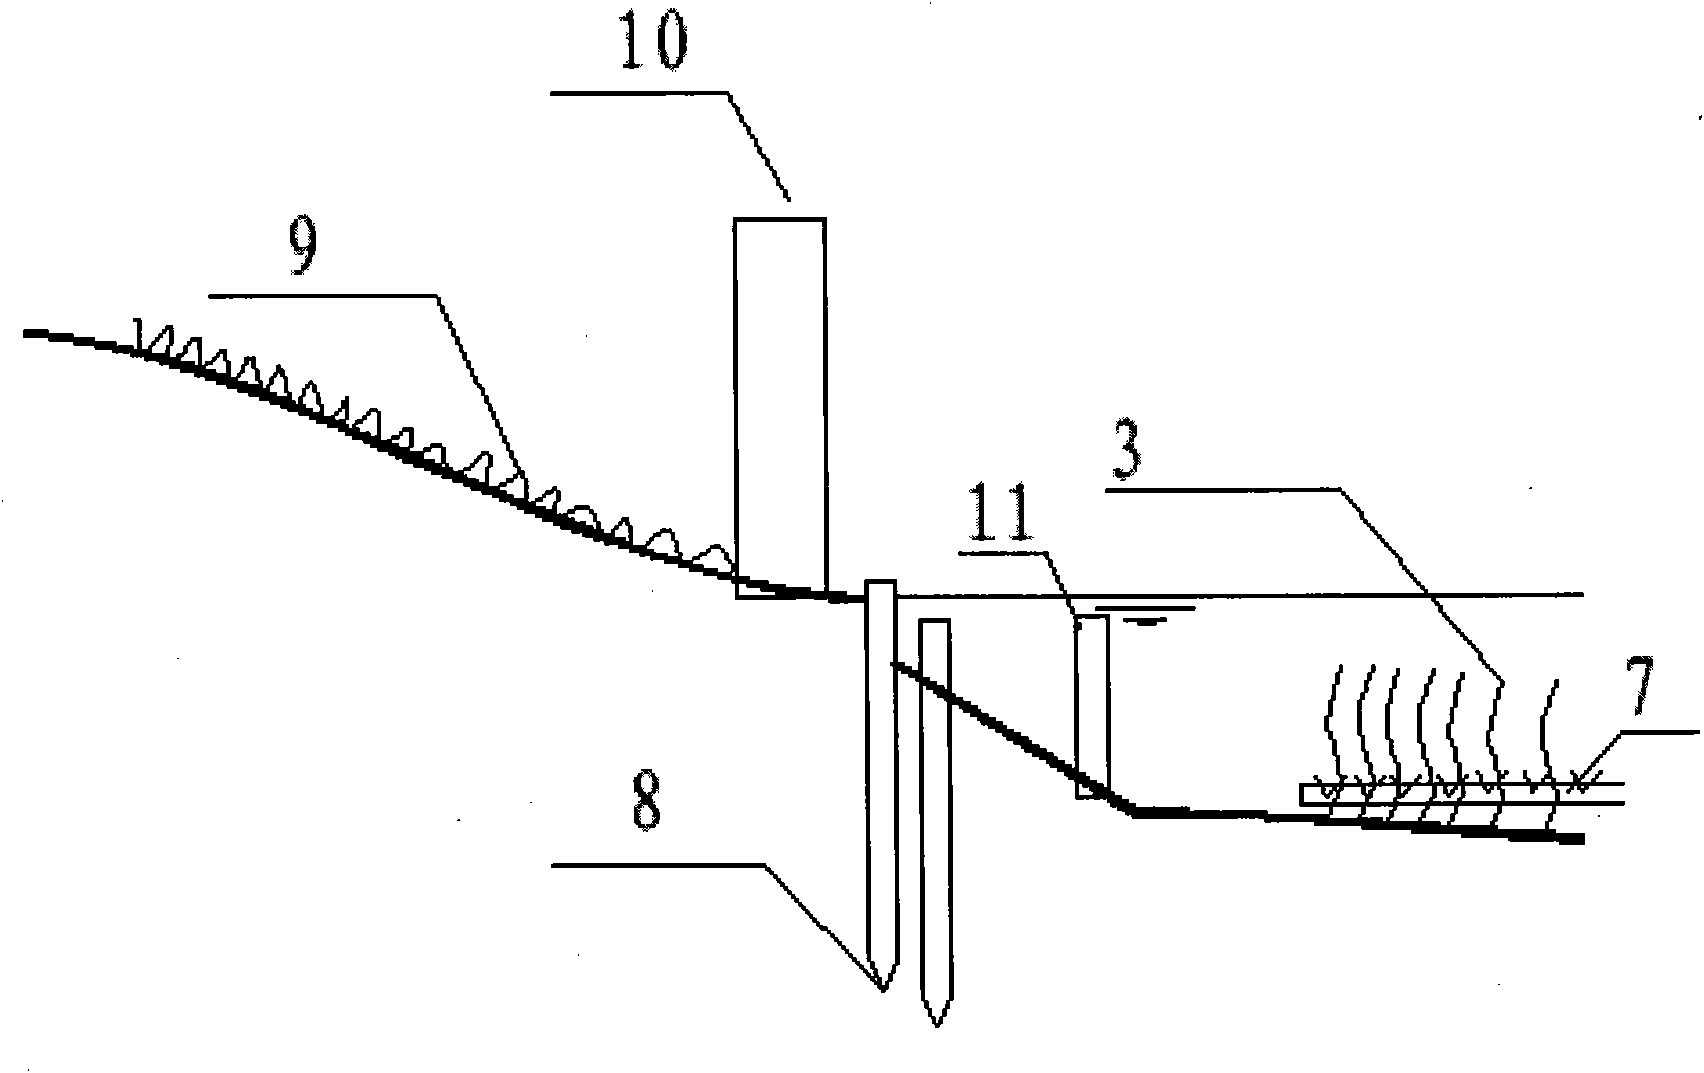 Method for treating sewage and ecologically restoring water environment of villages and small towns in water network region